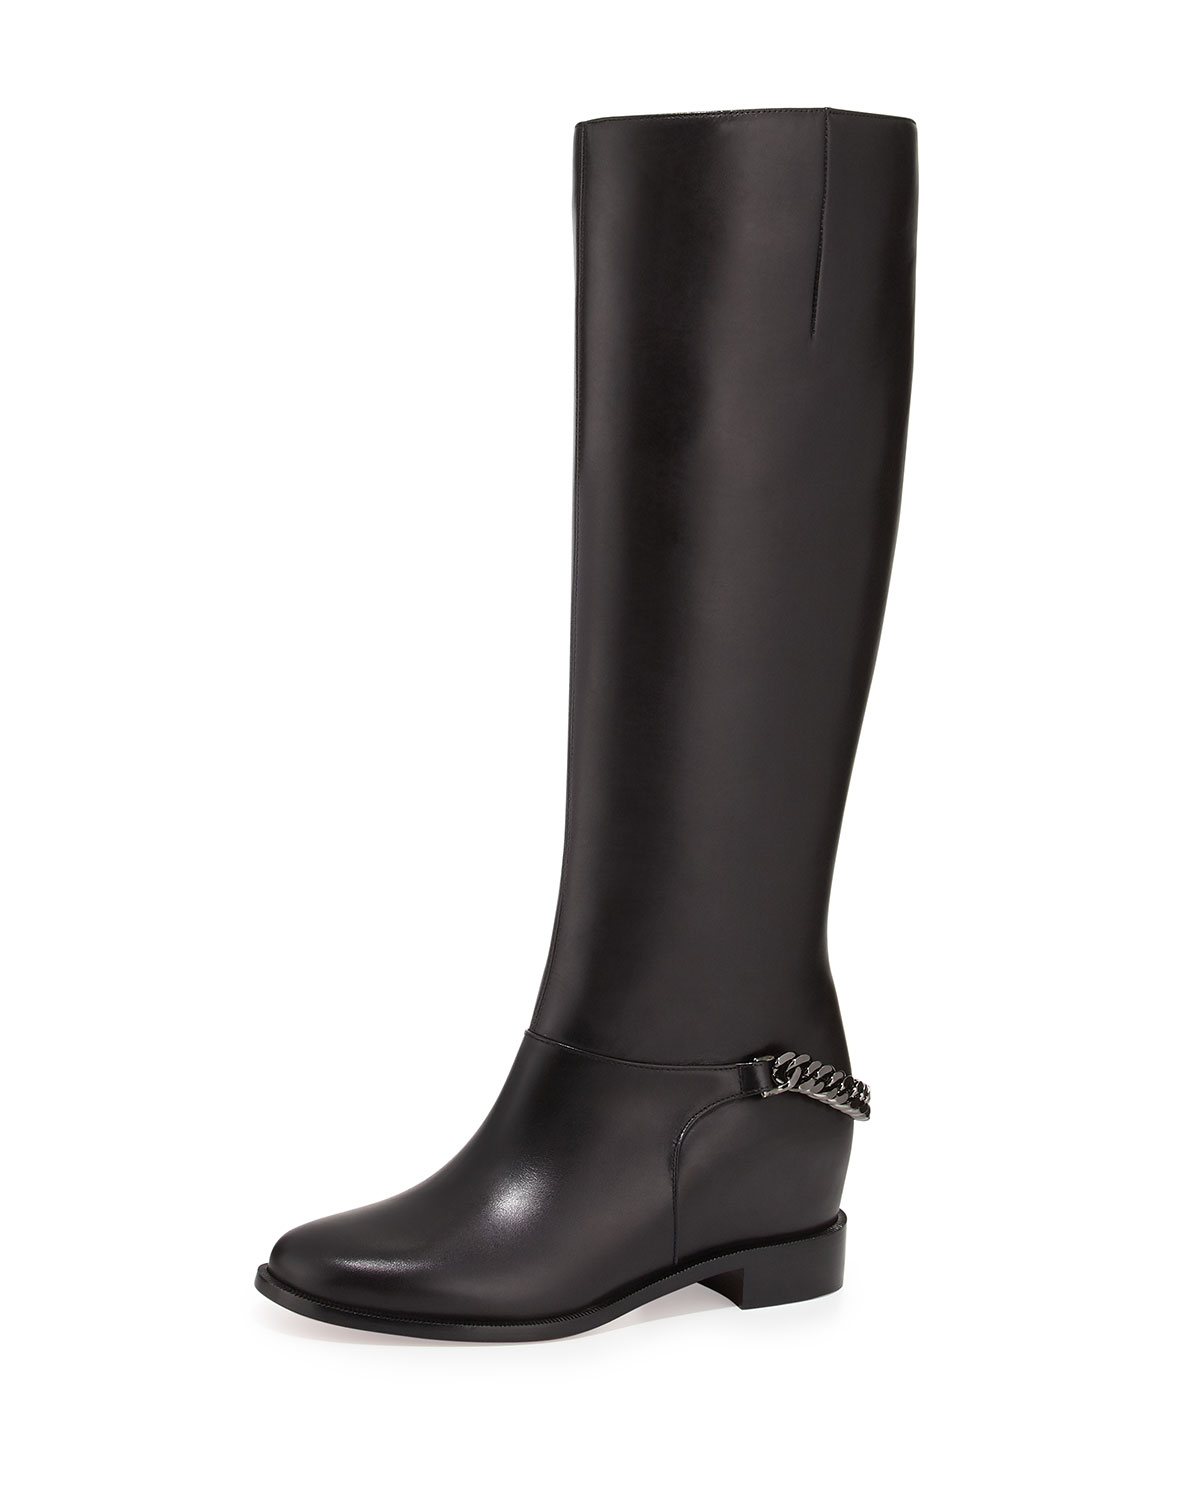 Christian louboutin Cate Hidden-Wedge Knee-High Boots in Black ...